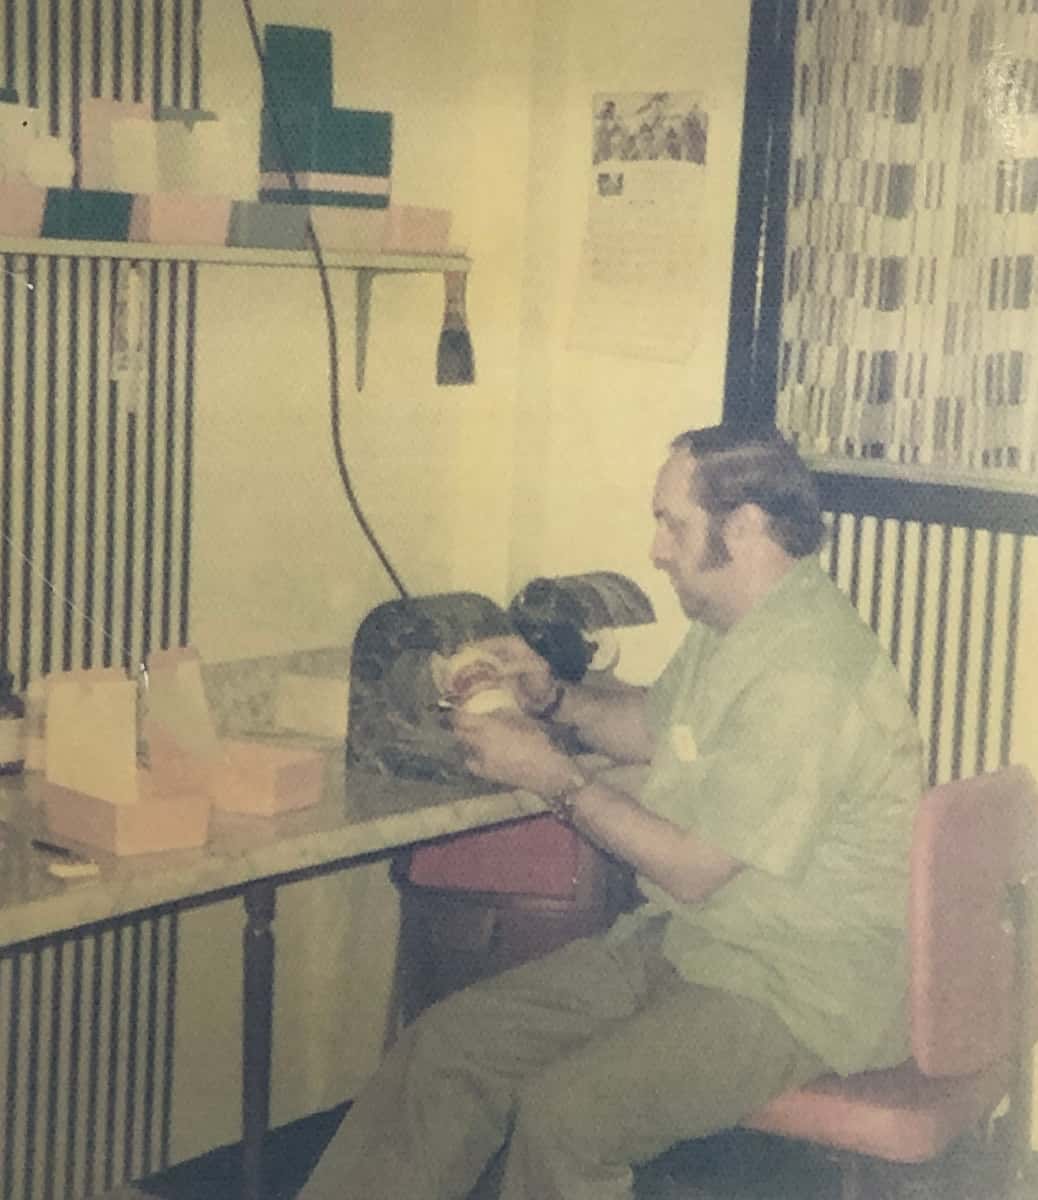 Denturist Joe Schankula in the lab at the downstairs Grantham Denture Clinic looking at a set of dentures in an articulator in his hands, circa 1970s